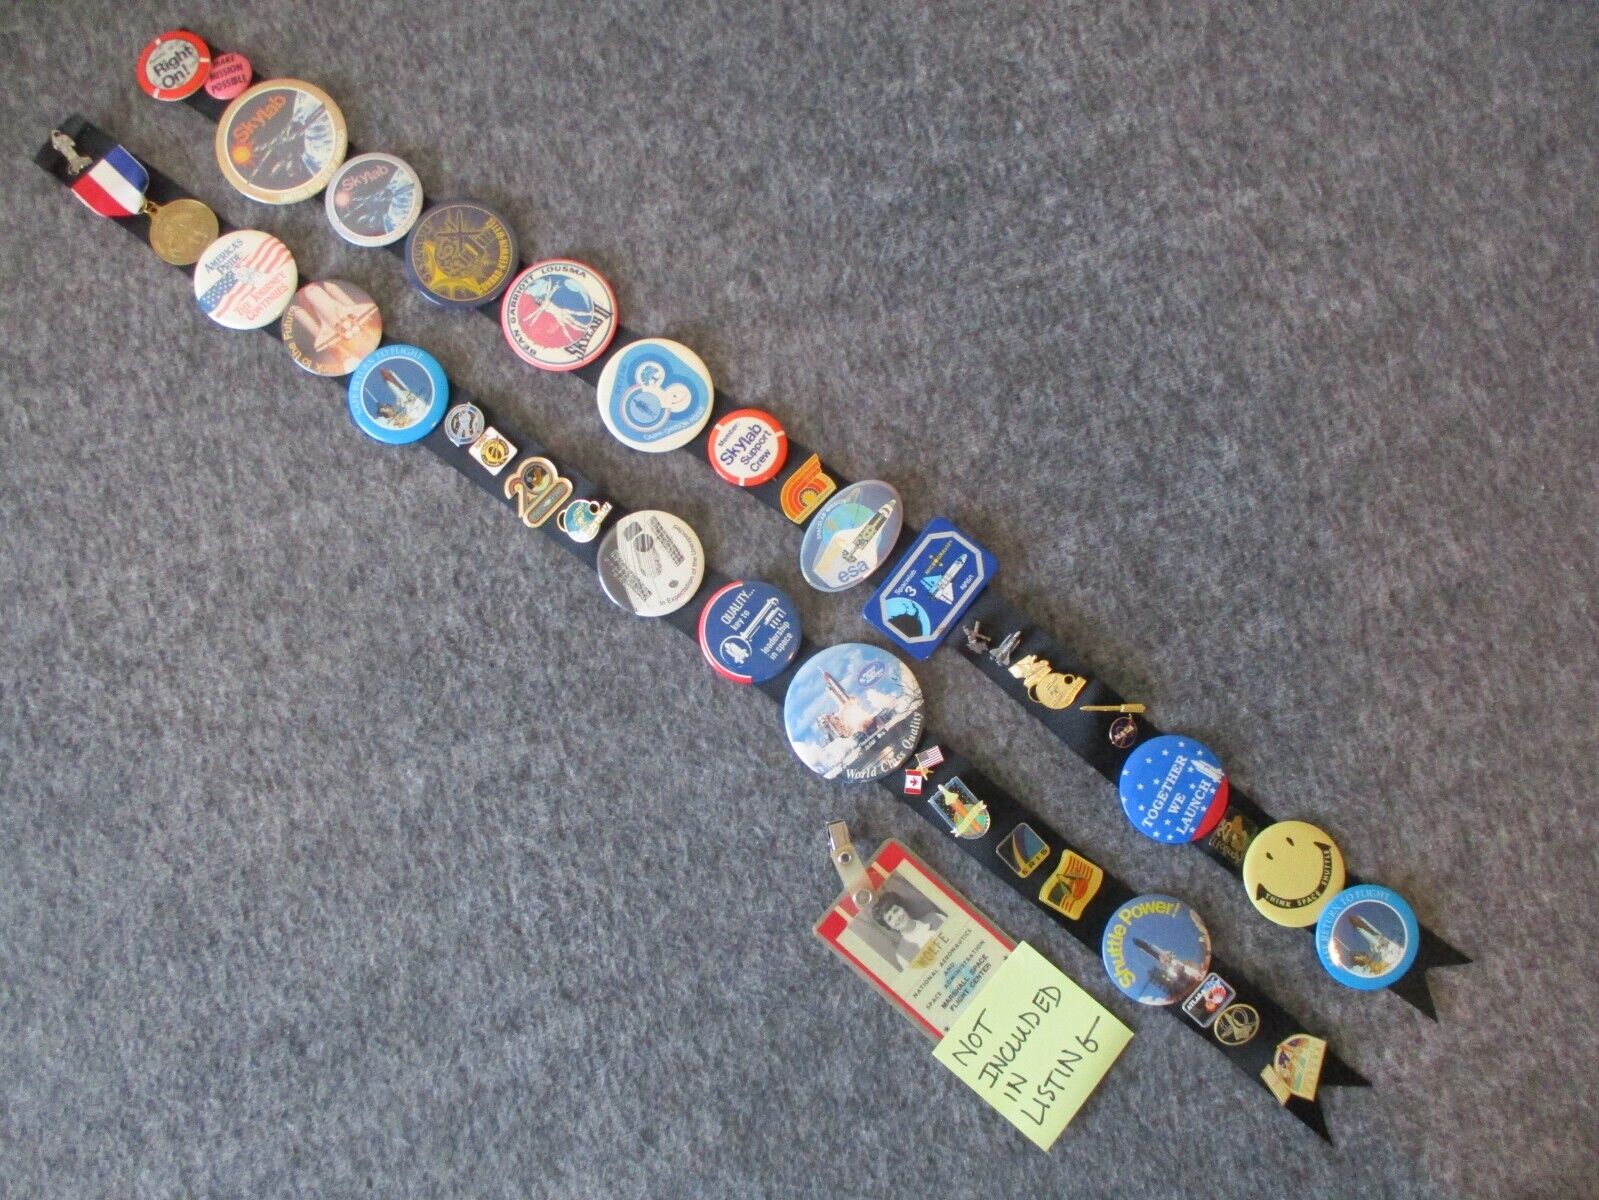 70s-90s NASA/CONTRACTOR ISSUED PIN COLLECTION+MEDAL APOLLO/SKYLAB/SPACE SHUTTLE+